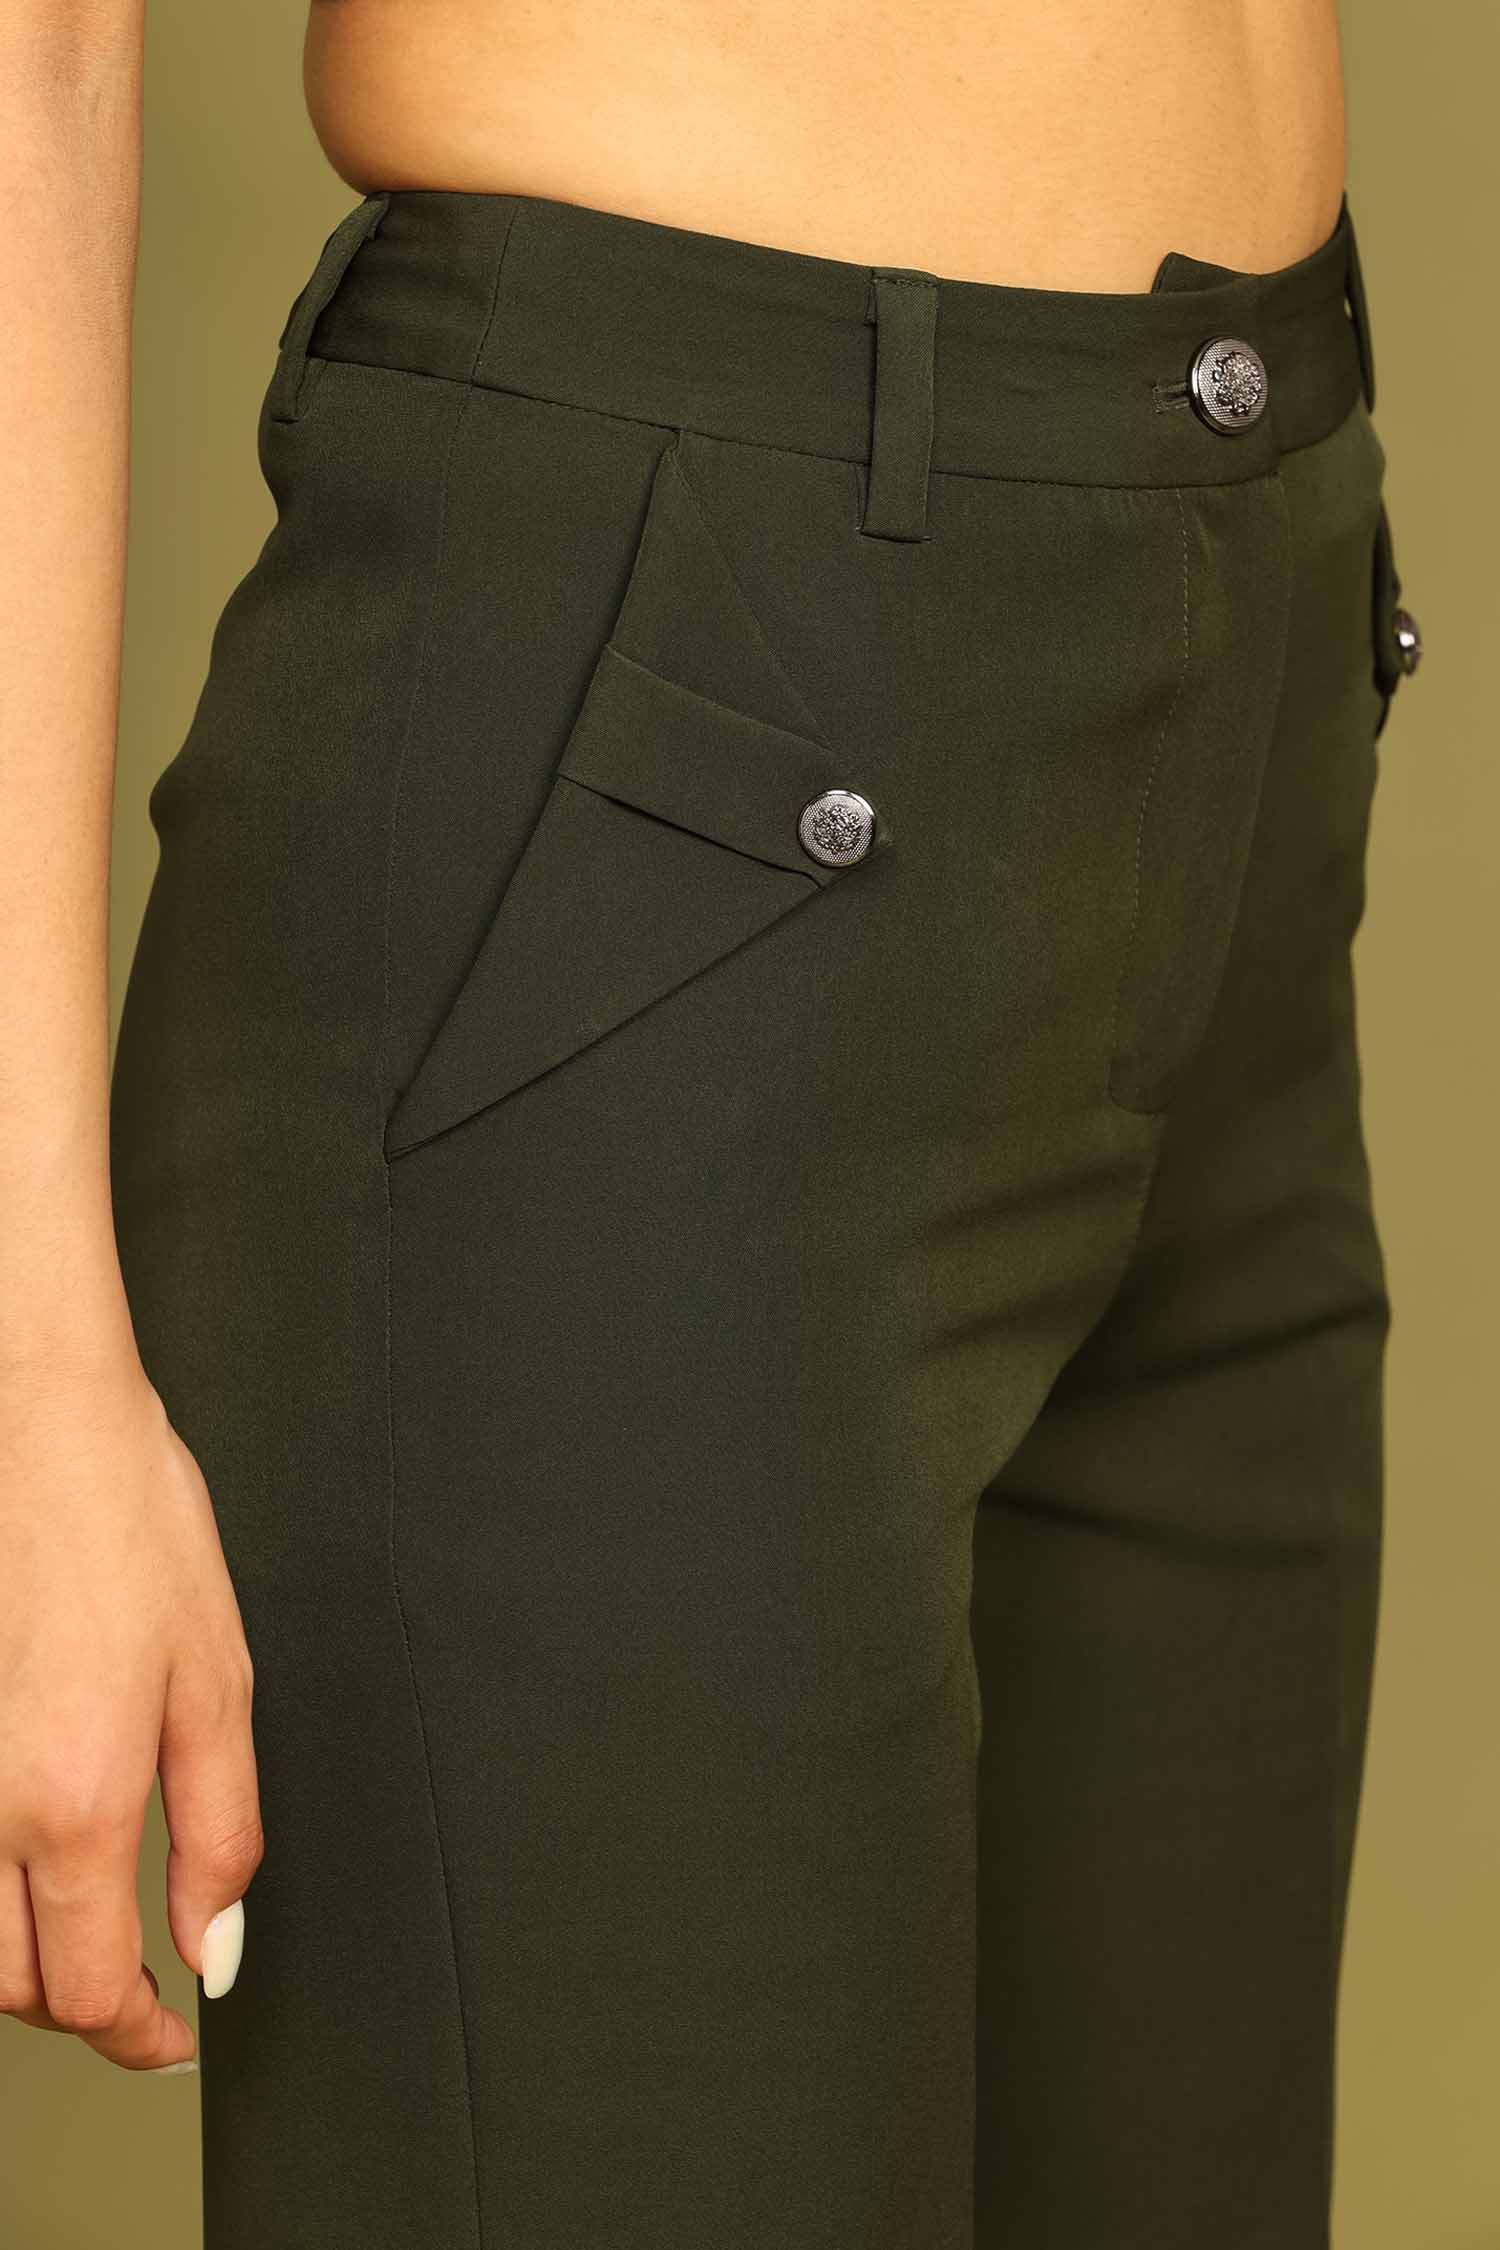 Juniper Green Flared Trousers With Box Pocket Flap